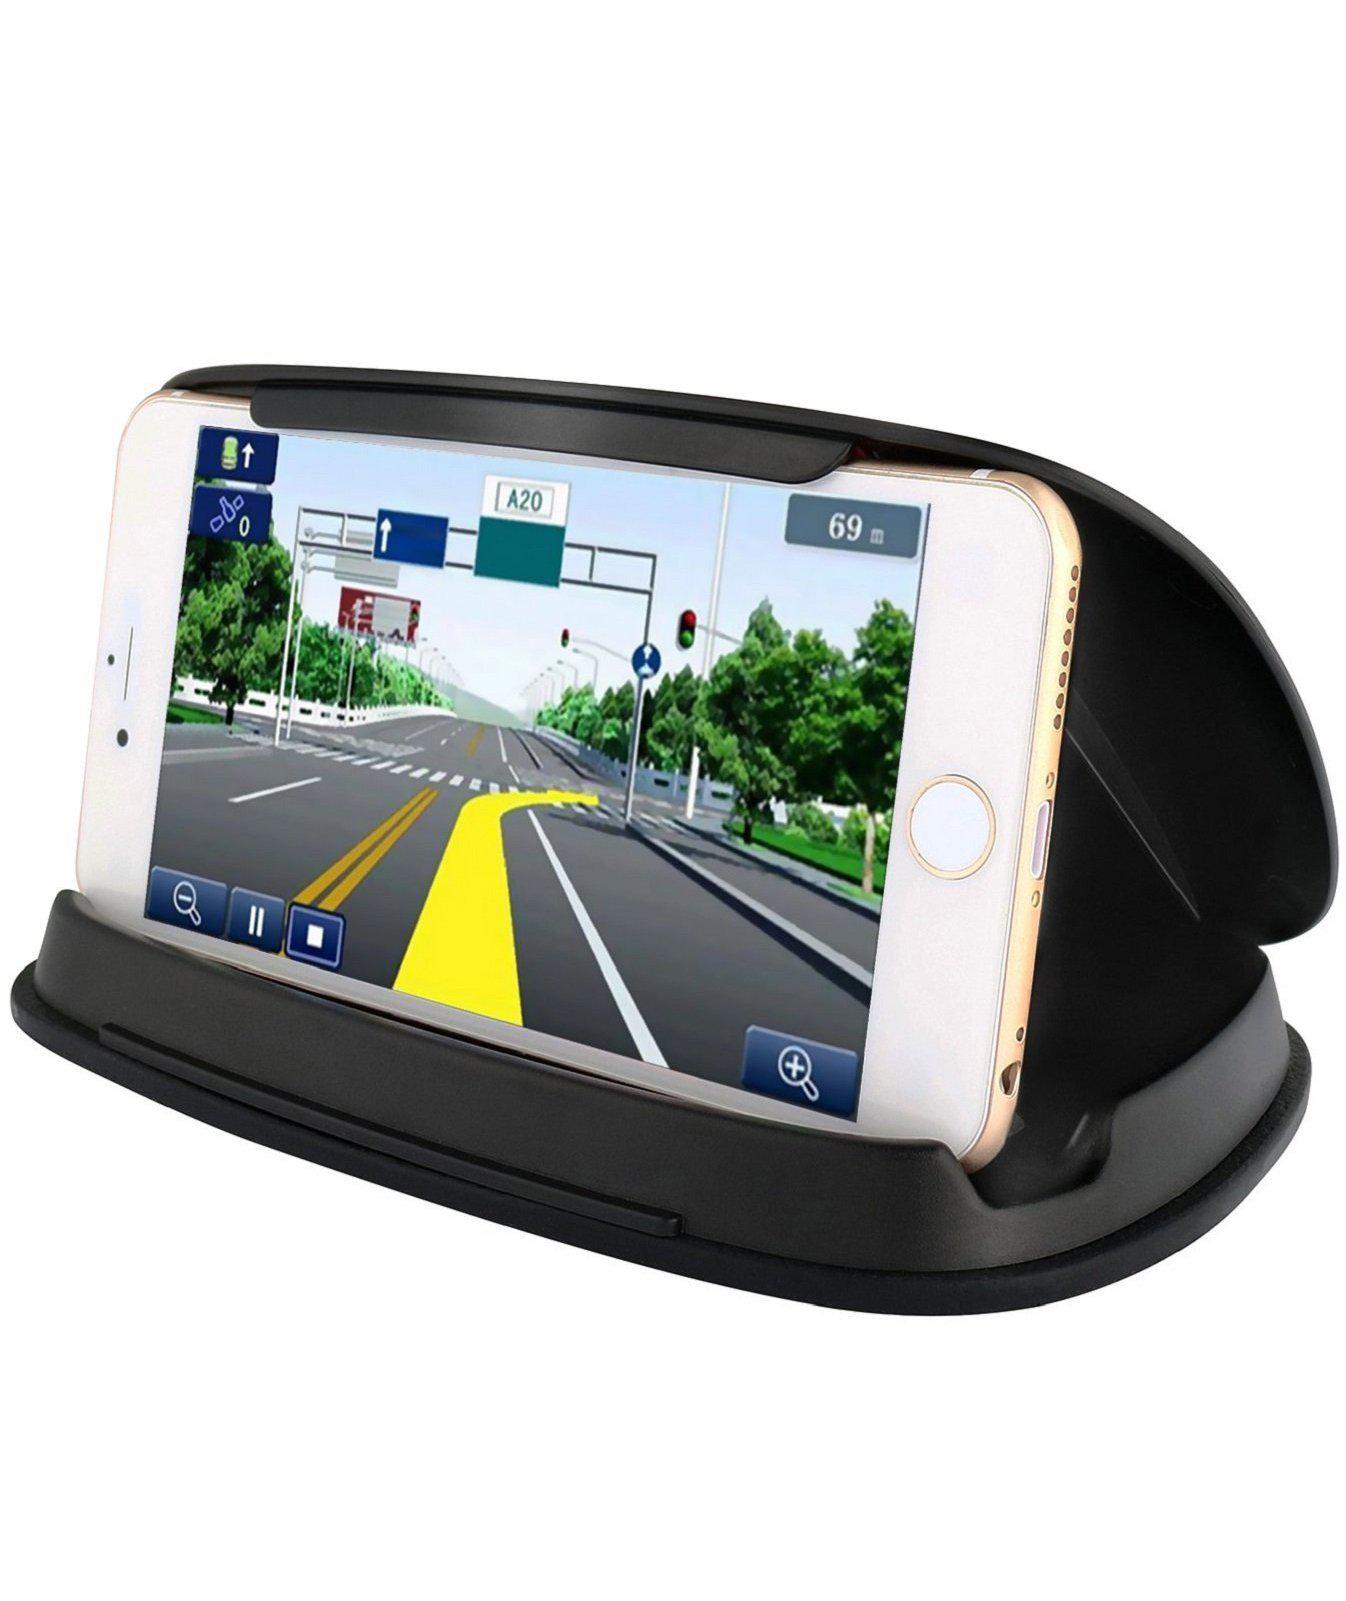 Buy SKYCELL Car Rear View Mirror Mount Holder Car Mount Holder Car Mobile Holder  Cell Phone Mount for iPhone 7/7s/8, iPhone X, Samsung Galaxy S6/S5, Mobile  Phones, Android Phone Online at Best